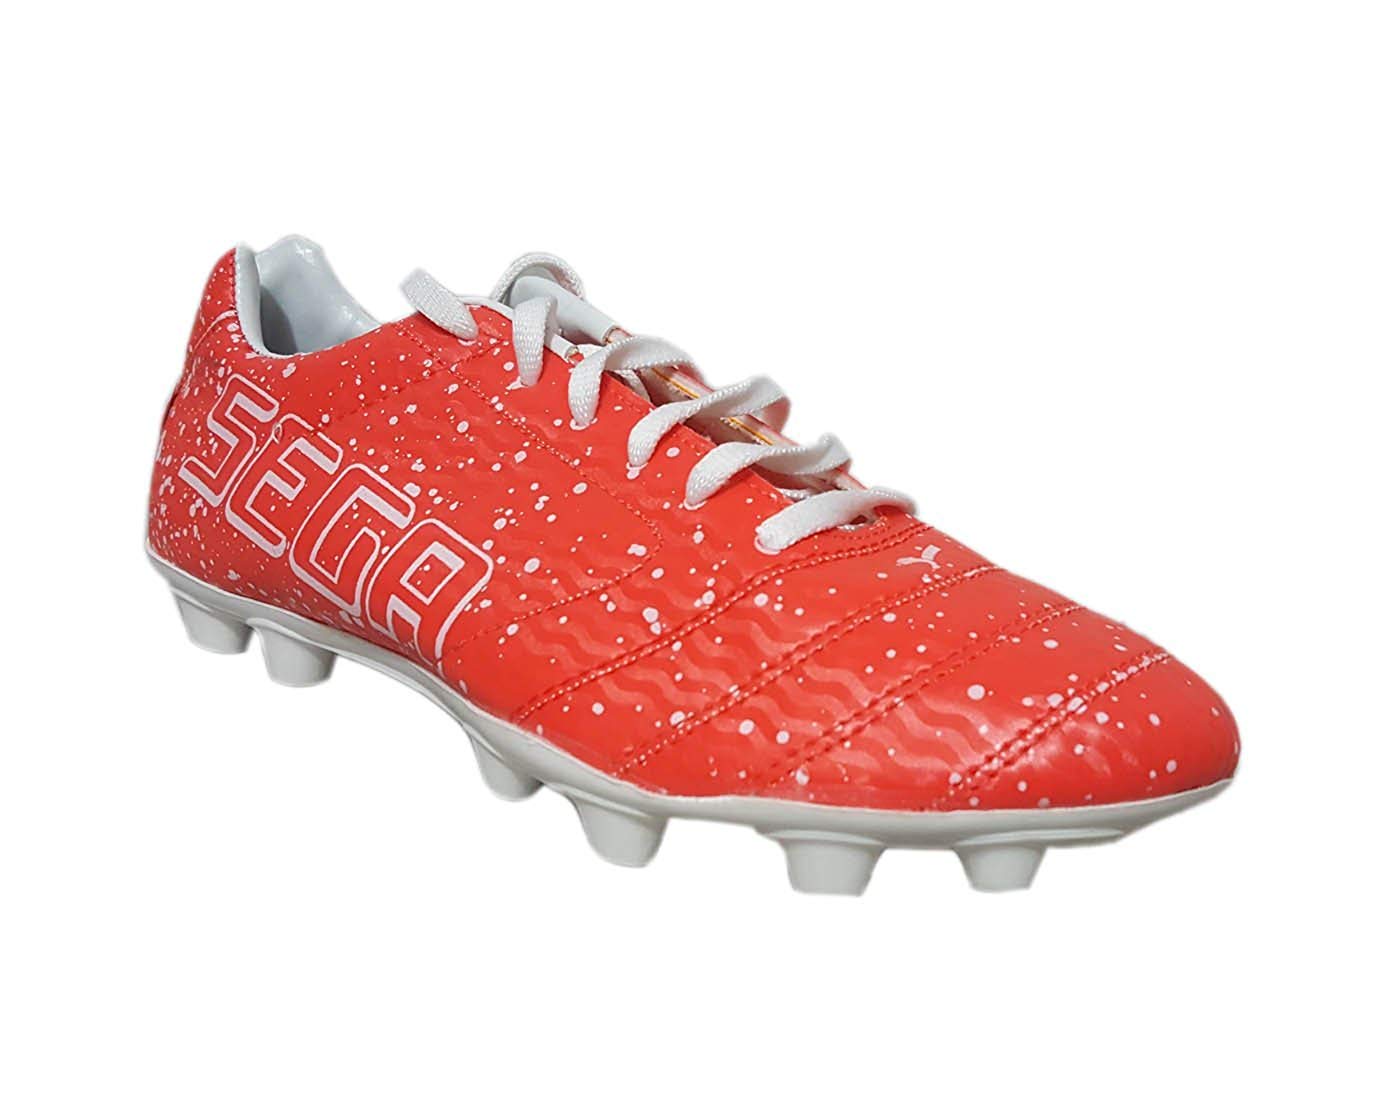 best football shoes under 1500